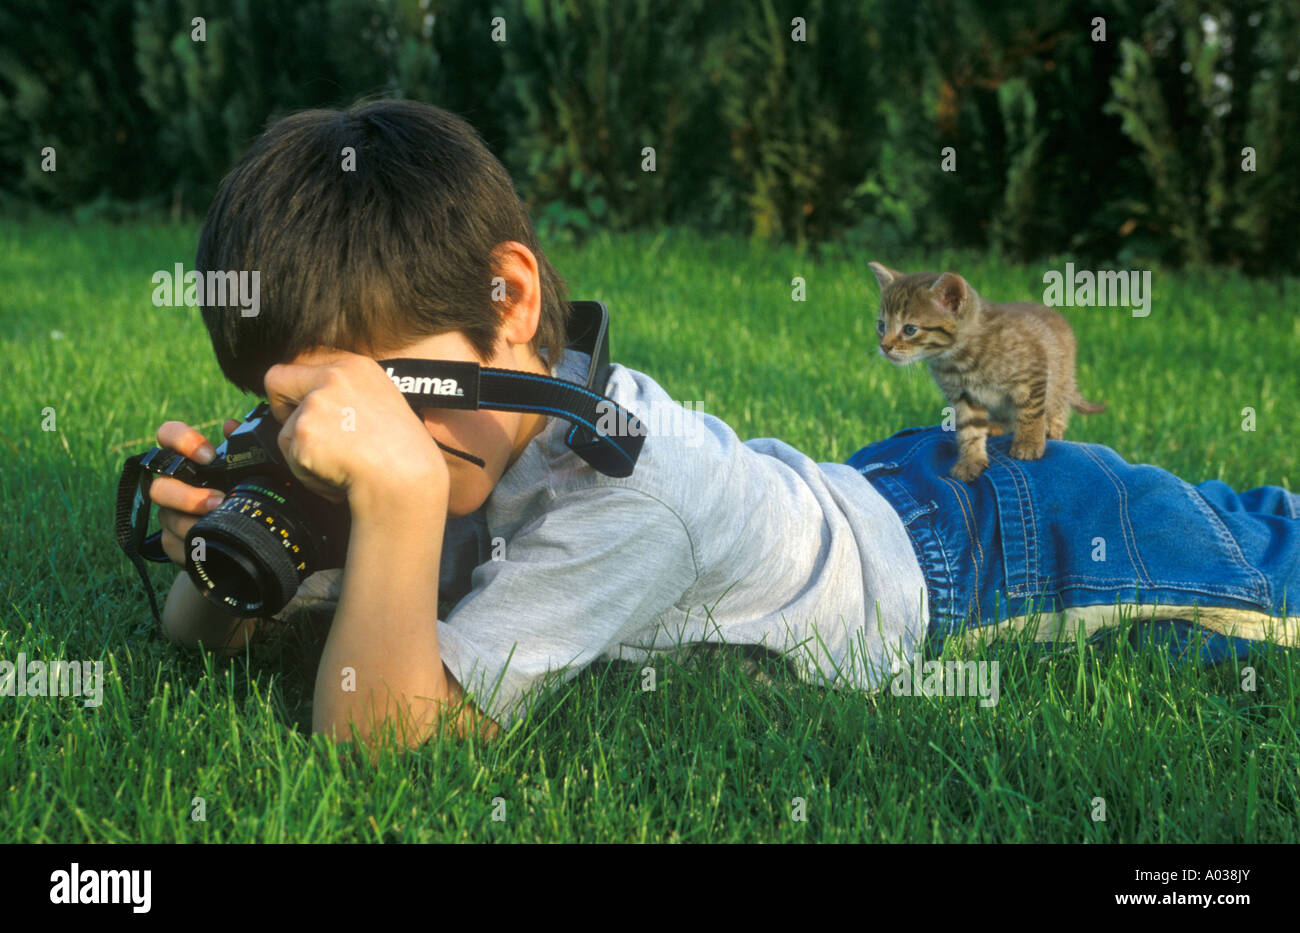 a boy is lying on a lawn taking photographs with a nosy kitten on his bottom Stock Photo